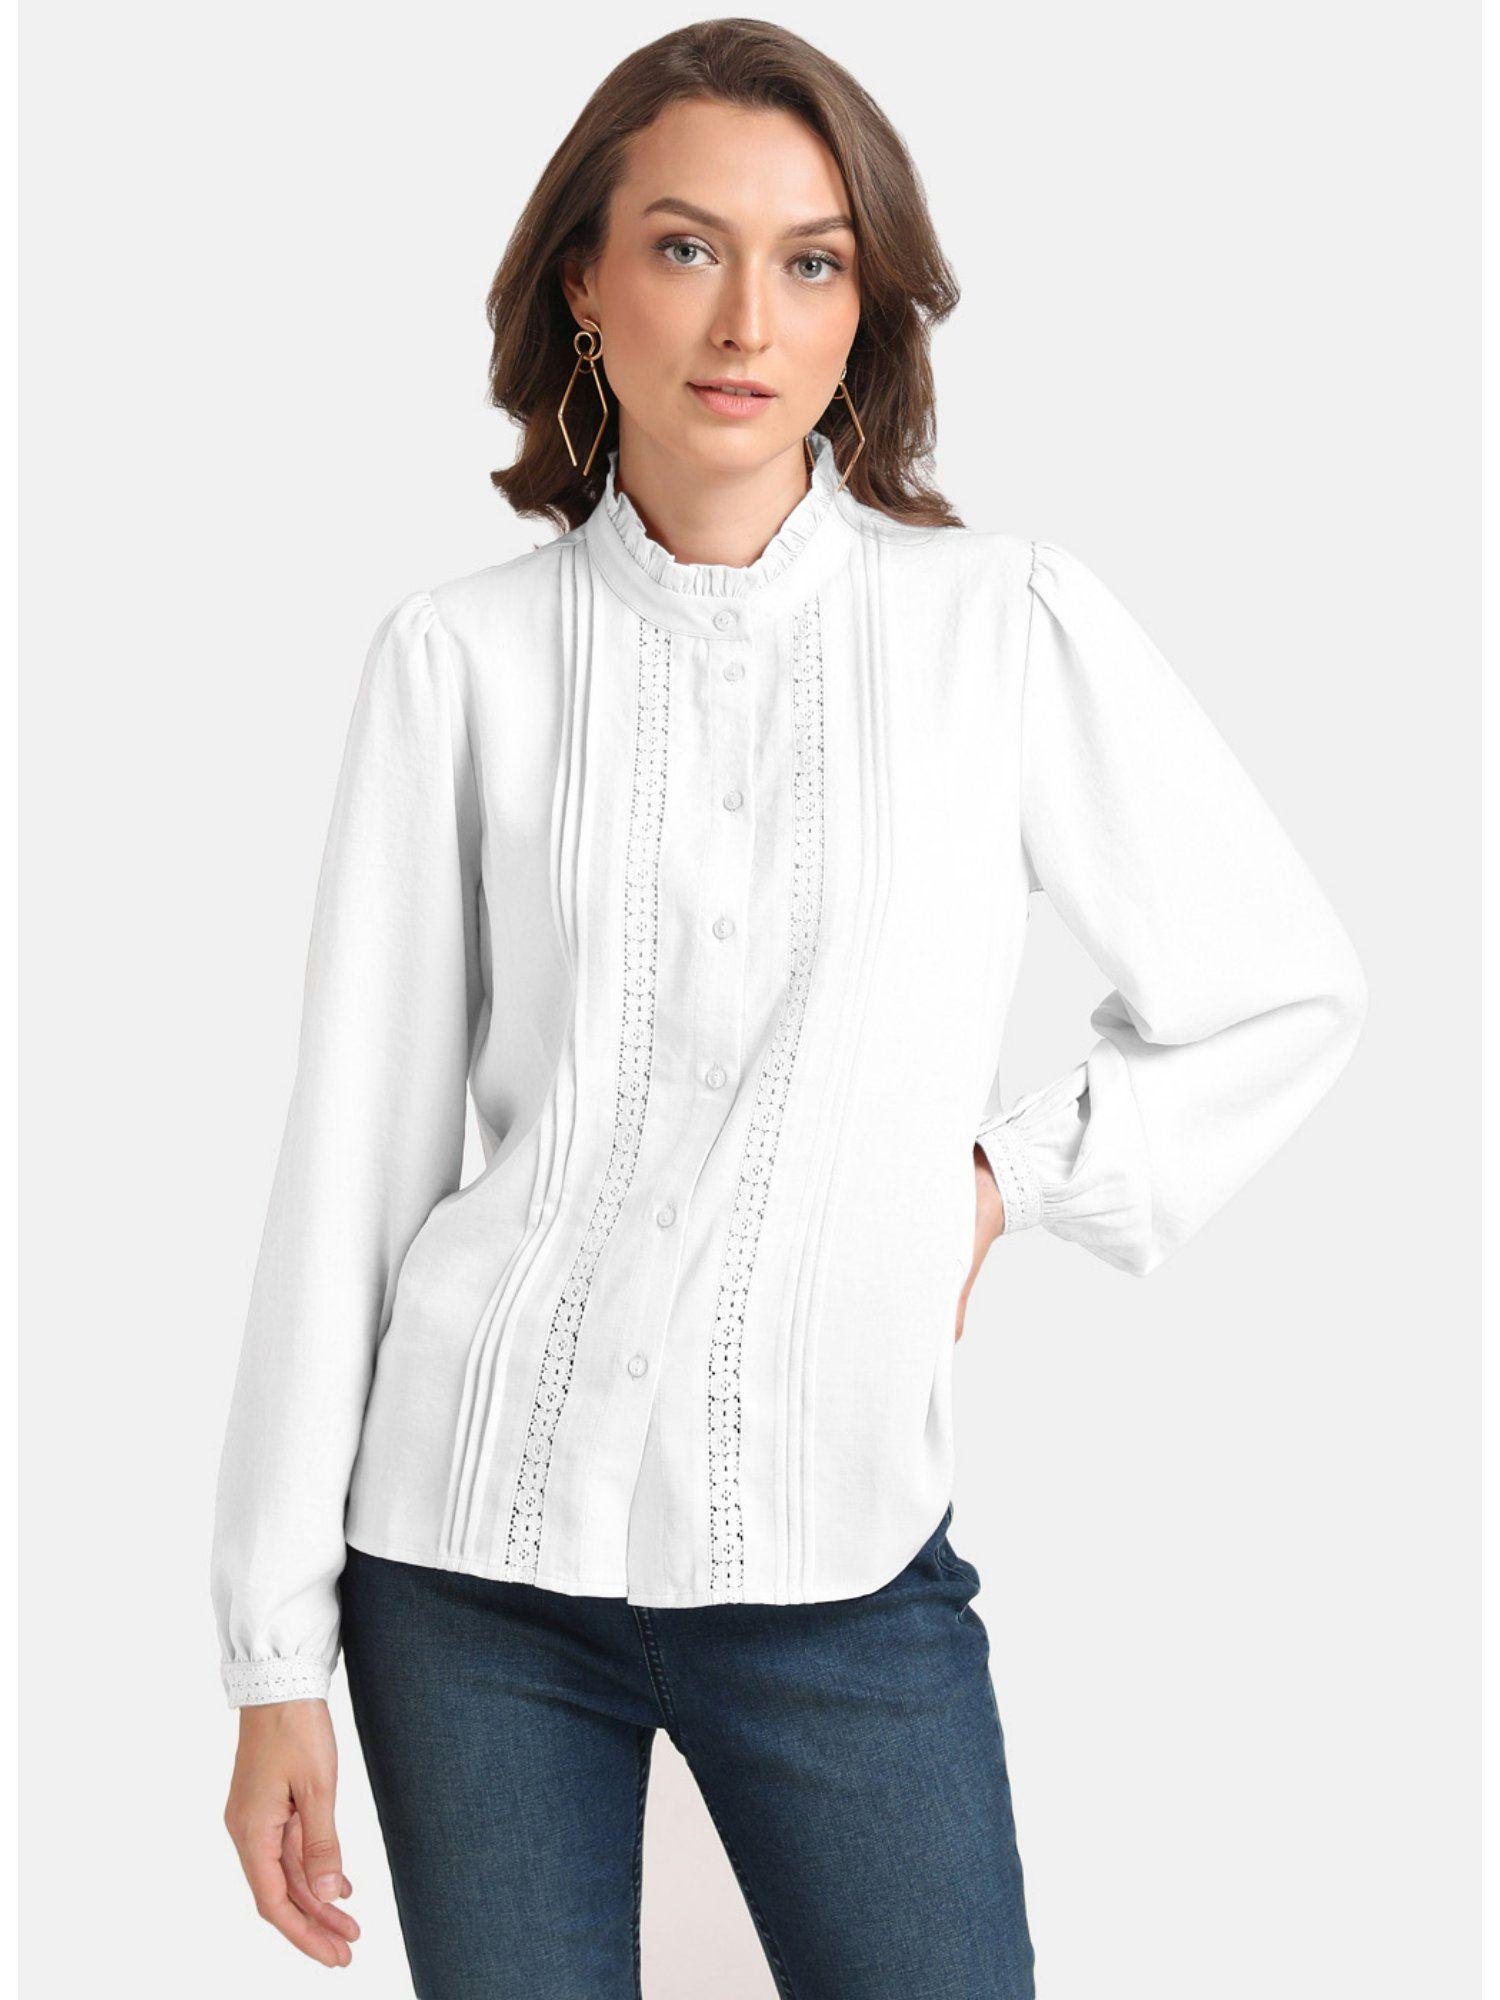 white shirt with lace detail and front pleates